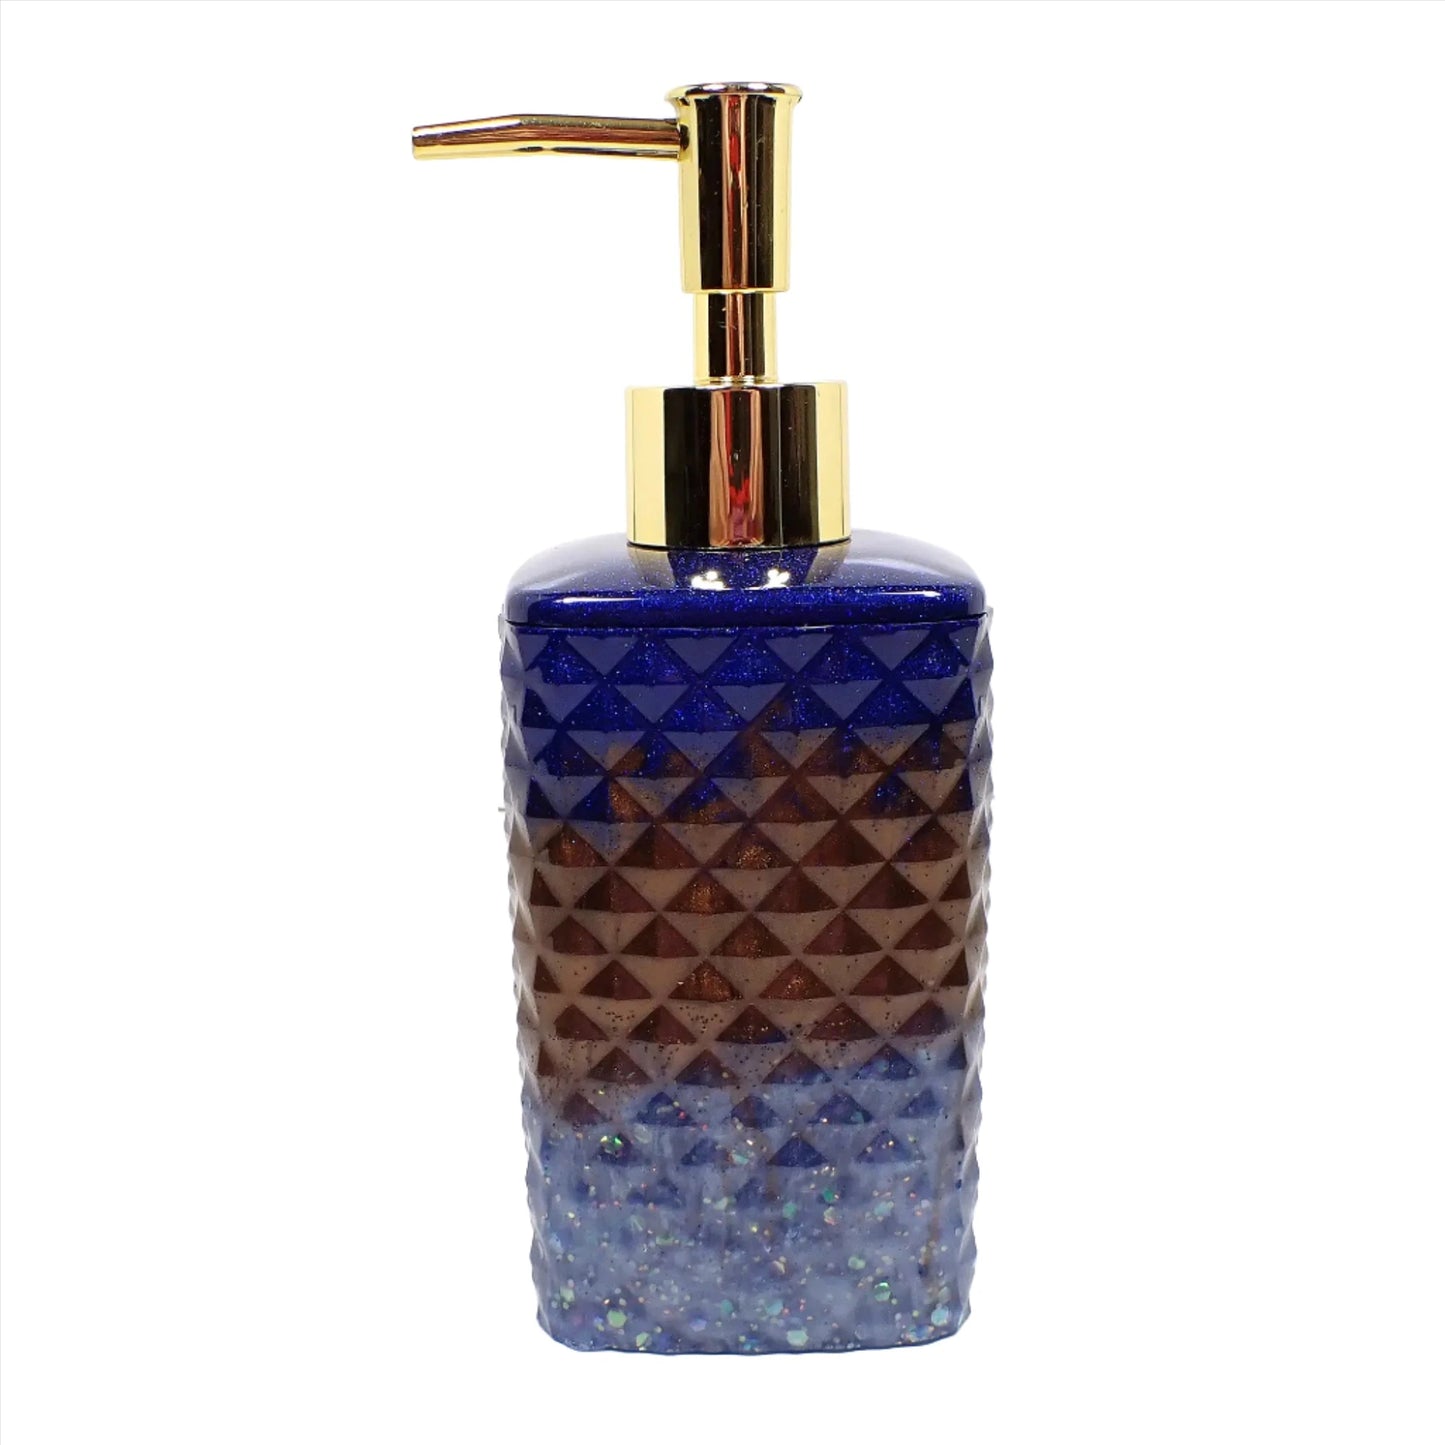 Side view of the handmade resin soap dispenser. It has a tall faceted square shape and has a gold color pump on top in this photo. The top part of the dispenser is dark blue with tiny blue glitter, the middle is dark brown, and the bottom is light blue with chunky iridescent glitter.